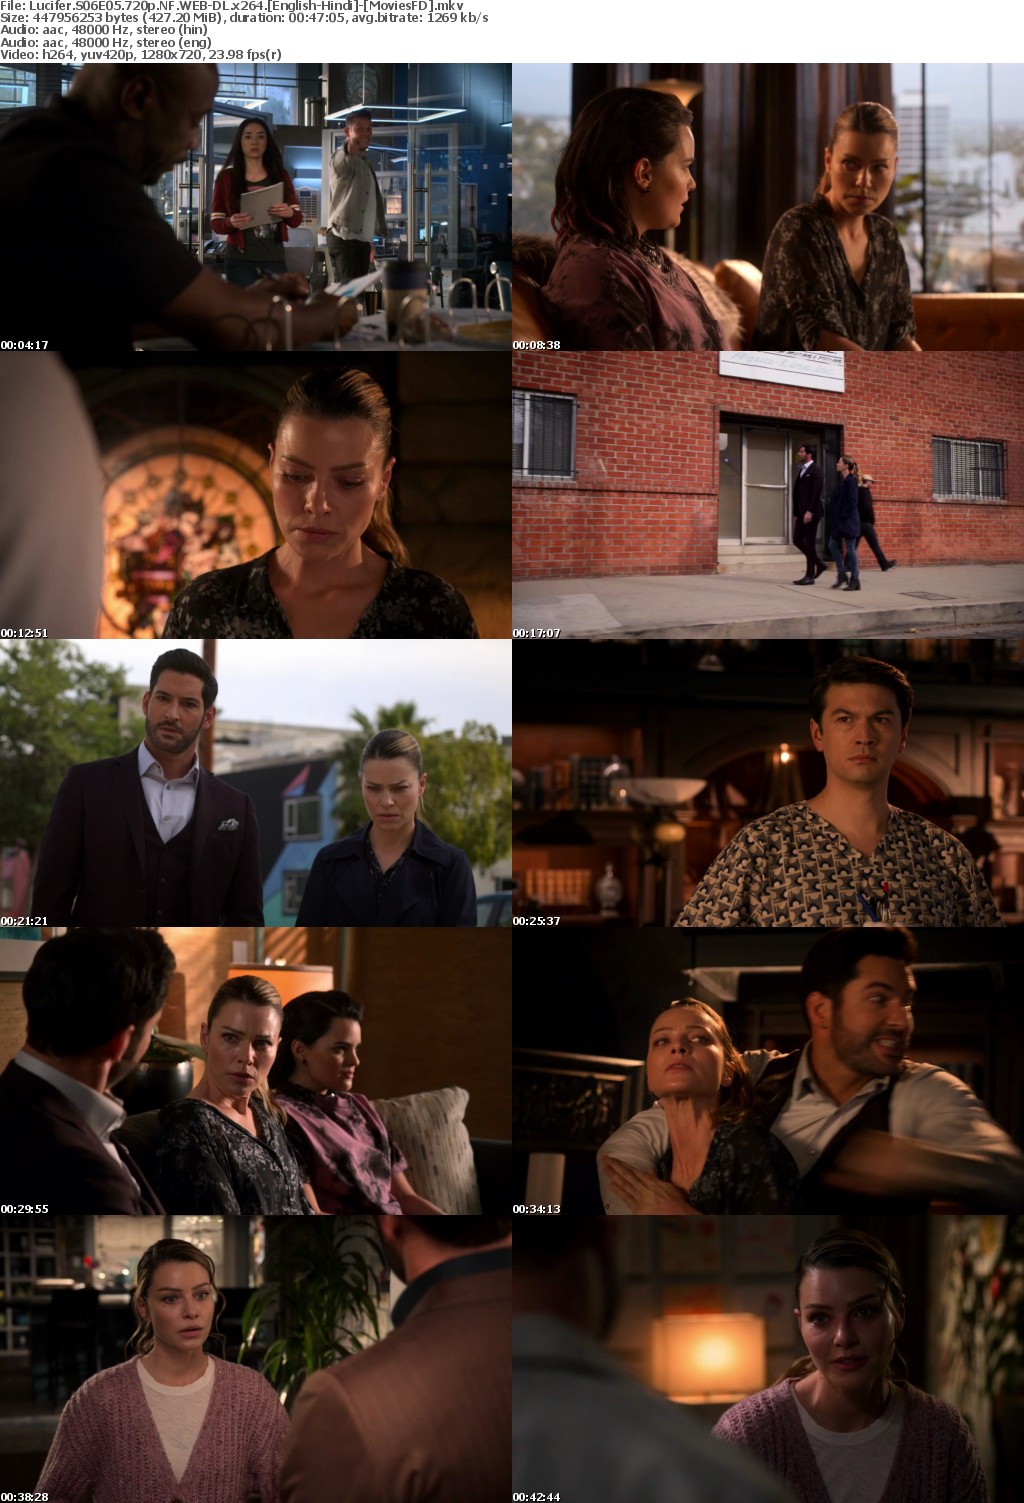 Lucifer S06 Complete 720p NF WEB-DL x264 ACC 5 1 English-Hindi MoviesFD